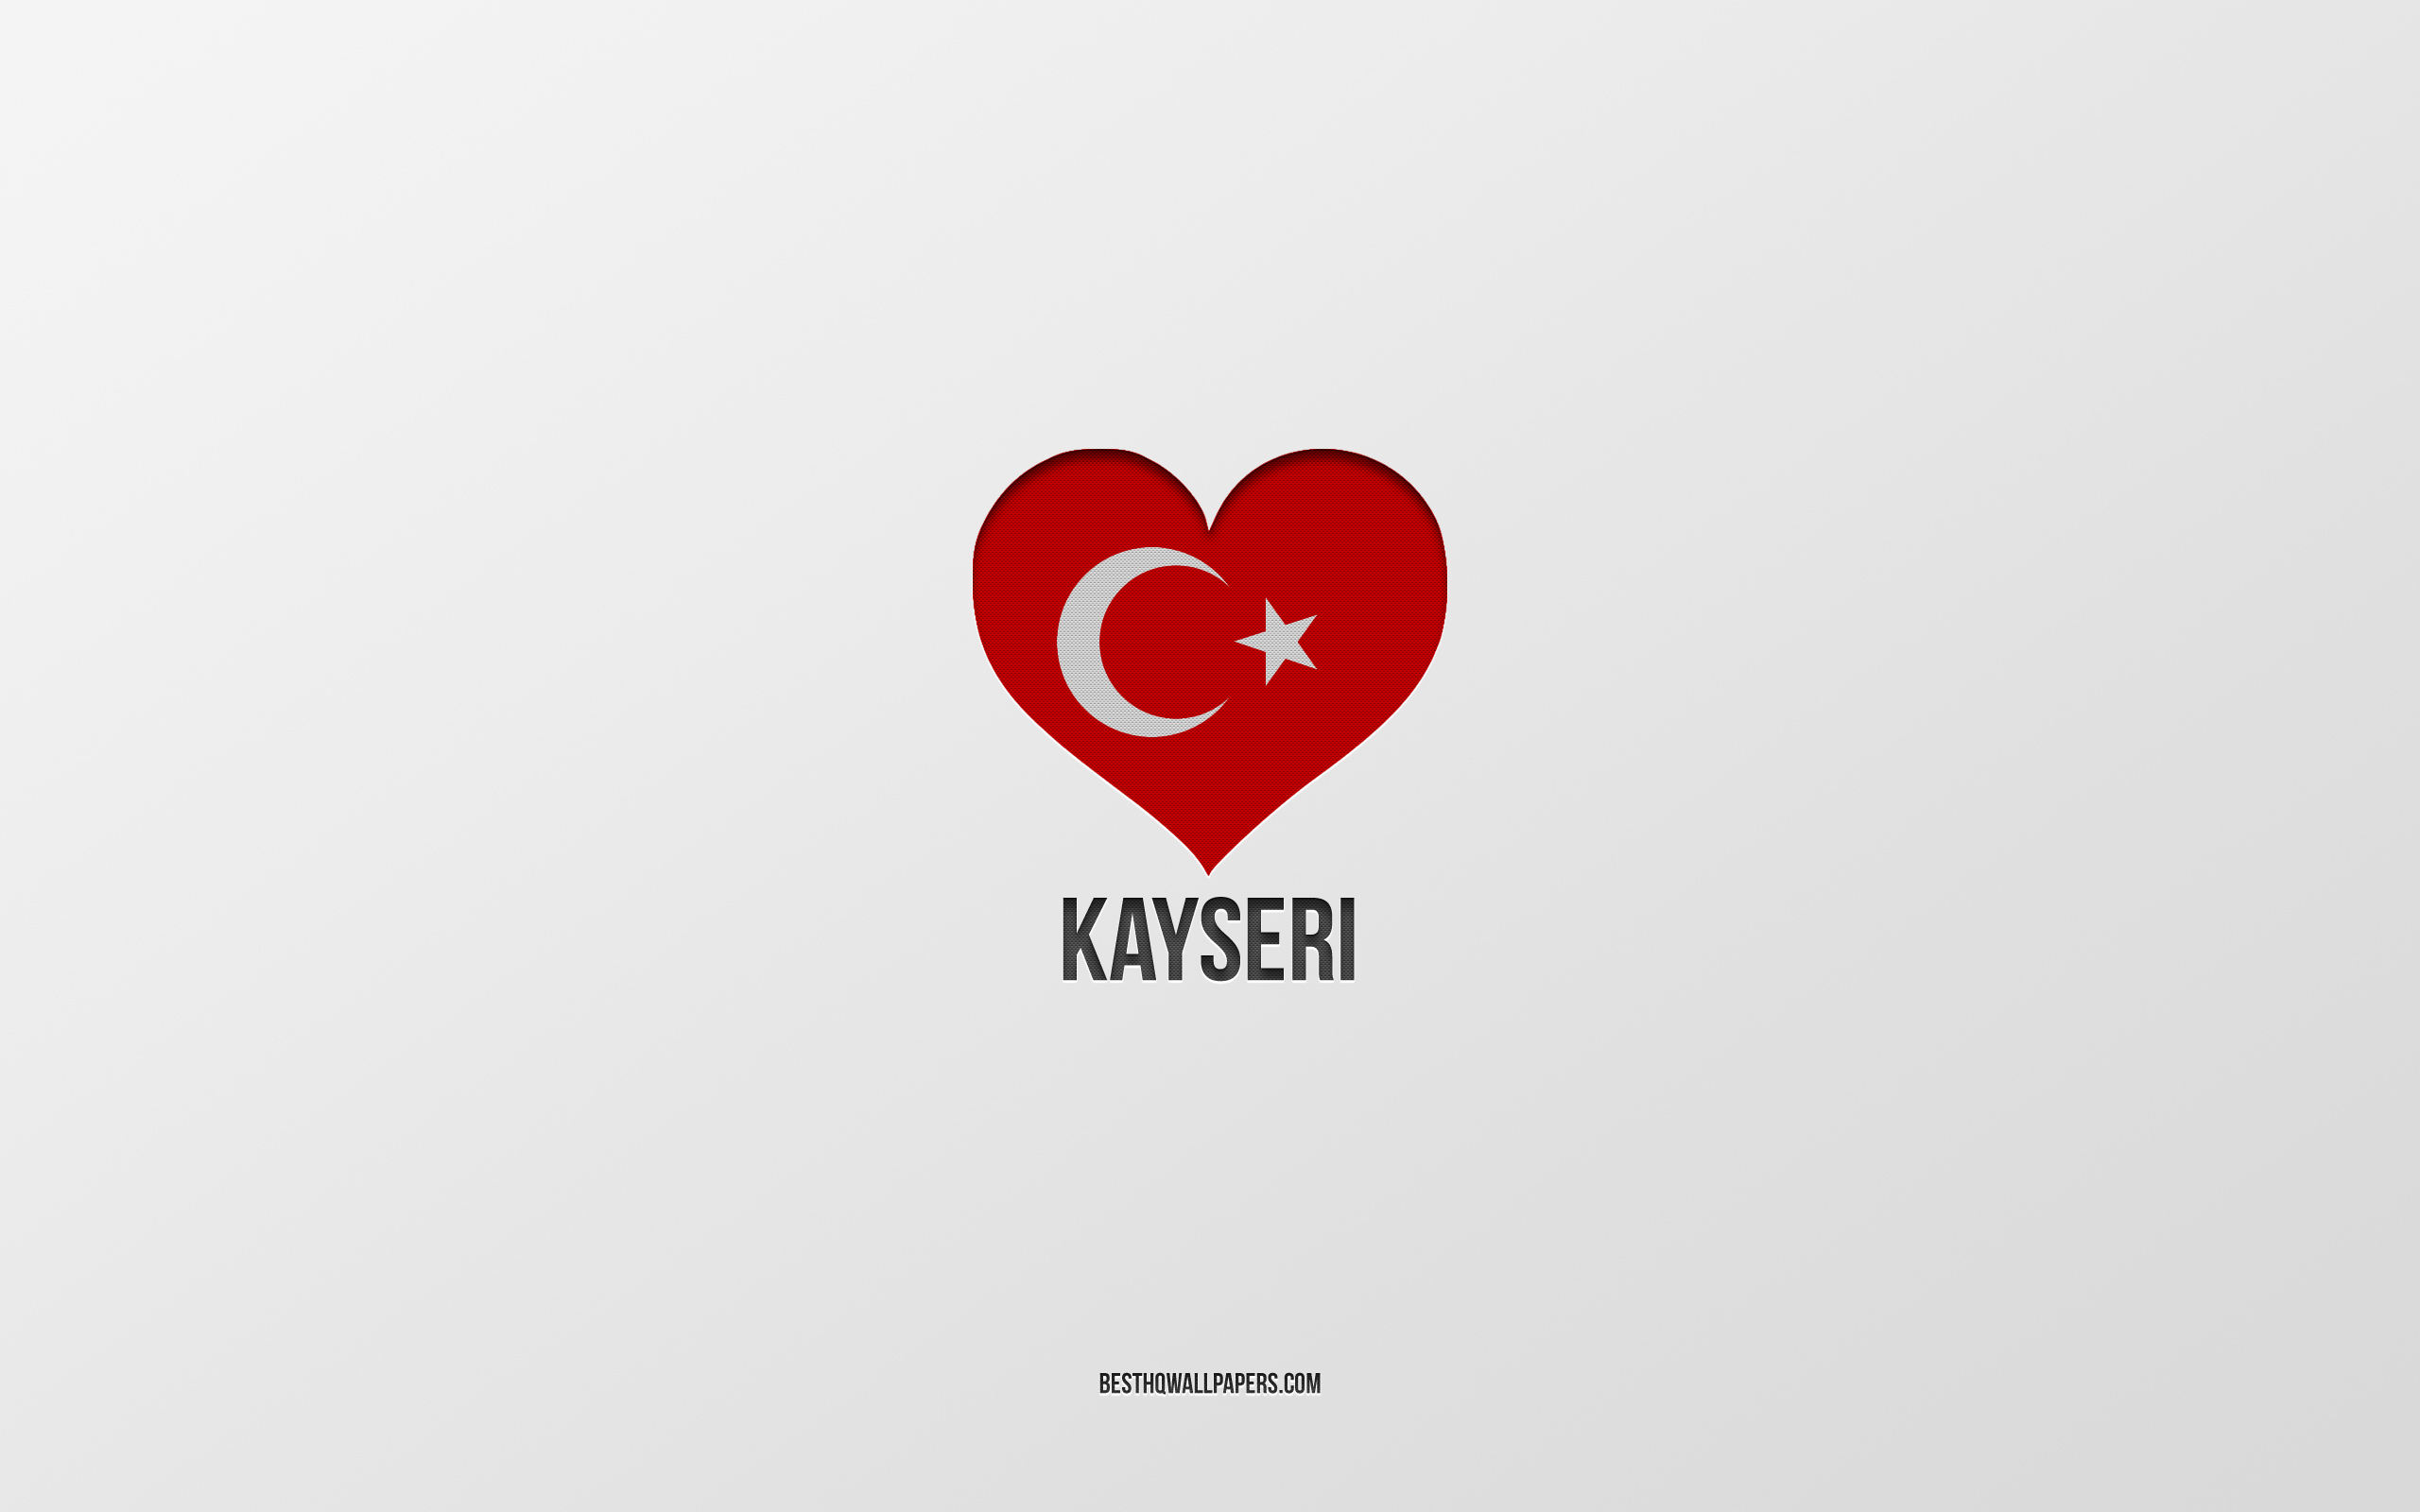 Download wallpaper I Love Kayseri, Turkish cities, gray background, Kayseri, Turkey, Turkish flag heart, favorite cities, Love Kayseri for desktop with resolution 2560x1600. High Quality HD picture wallpaper